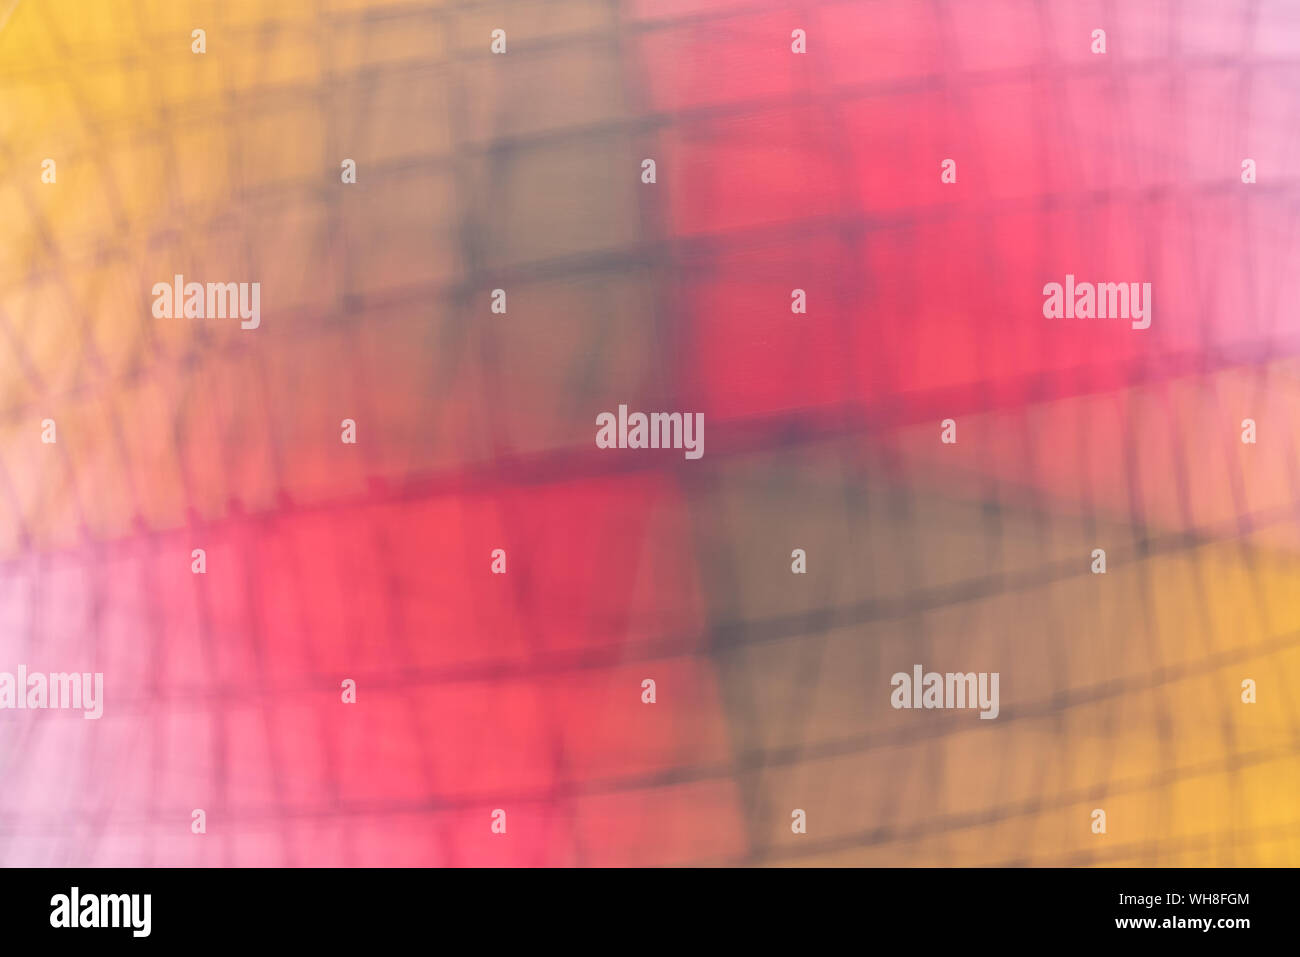 Defocused blurred abstract colorful background Stock Photo